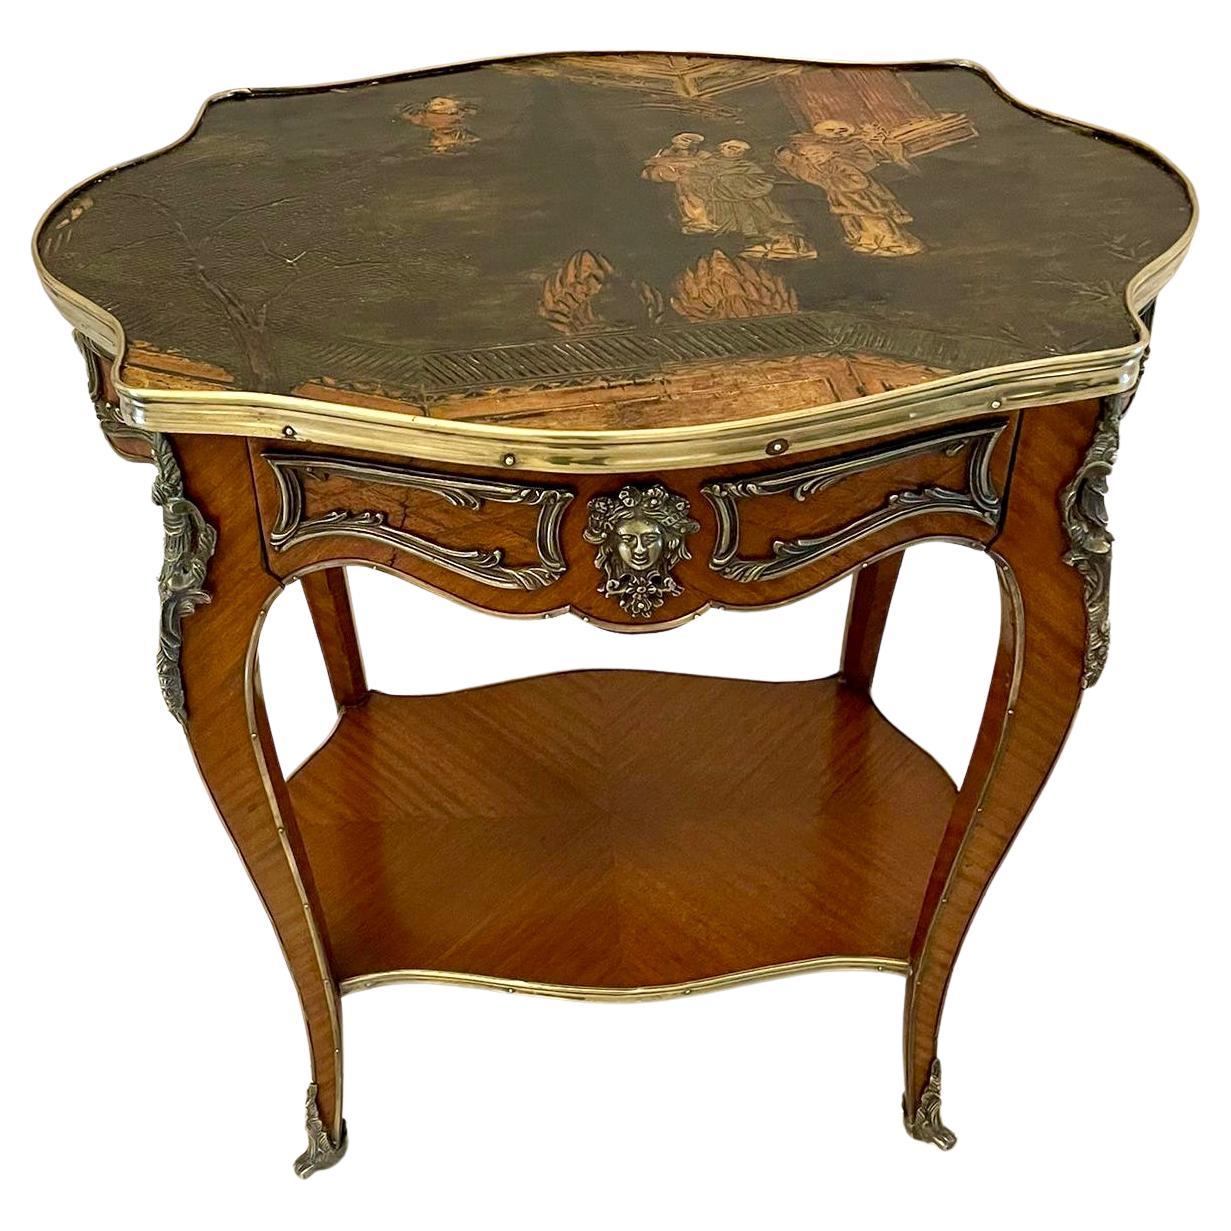 Outstanding Antique French Kingwood and Ormolu Mounted Freestanding Centre Table